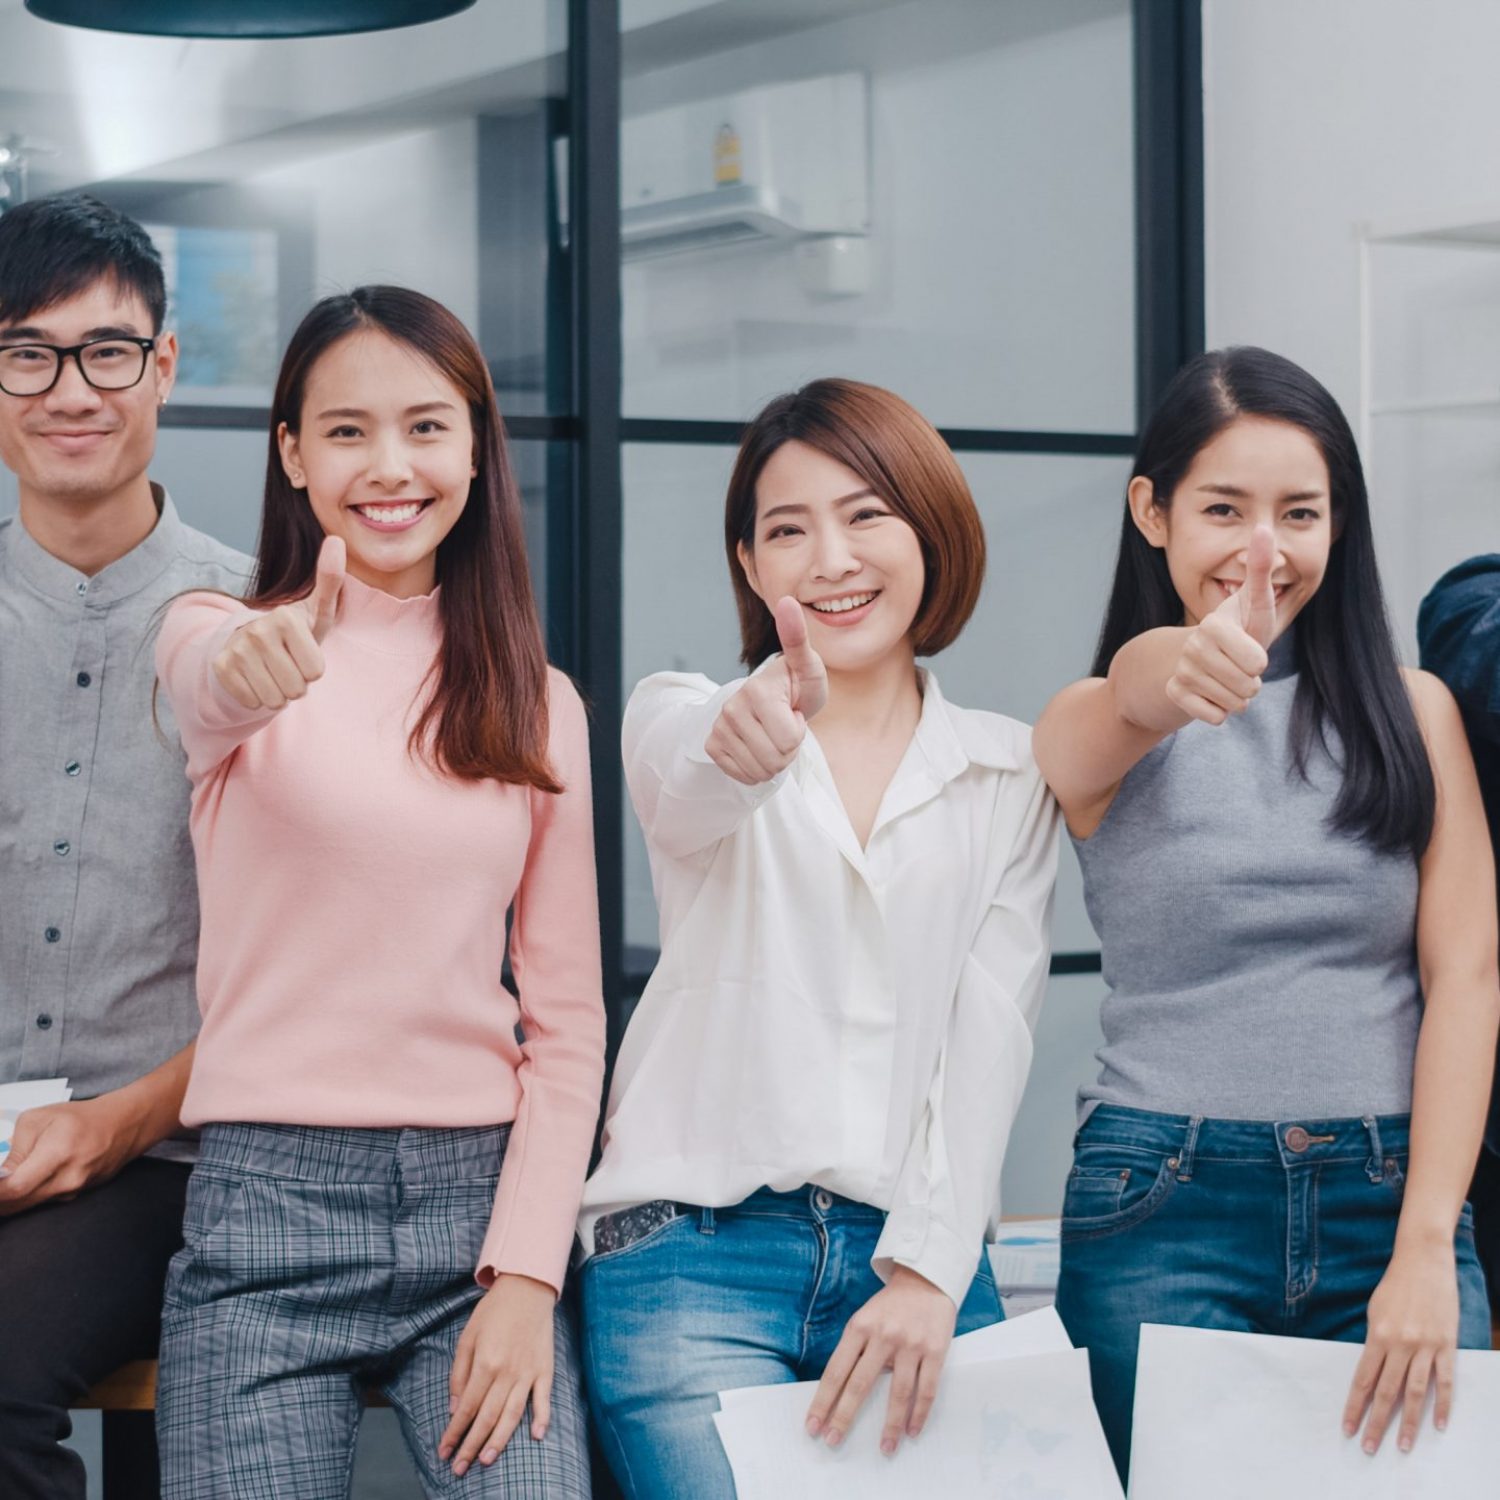 Group of Asia young creative people in smart casual wear smiling and thumbs up in creative office workplace. Diverse Asian male and female stand together at startup. Coworker teamwork concept.